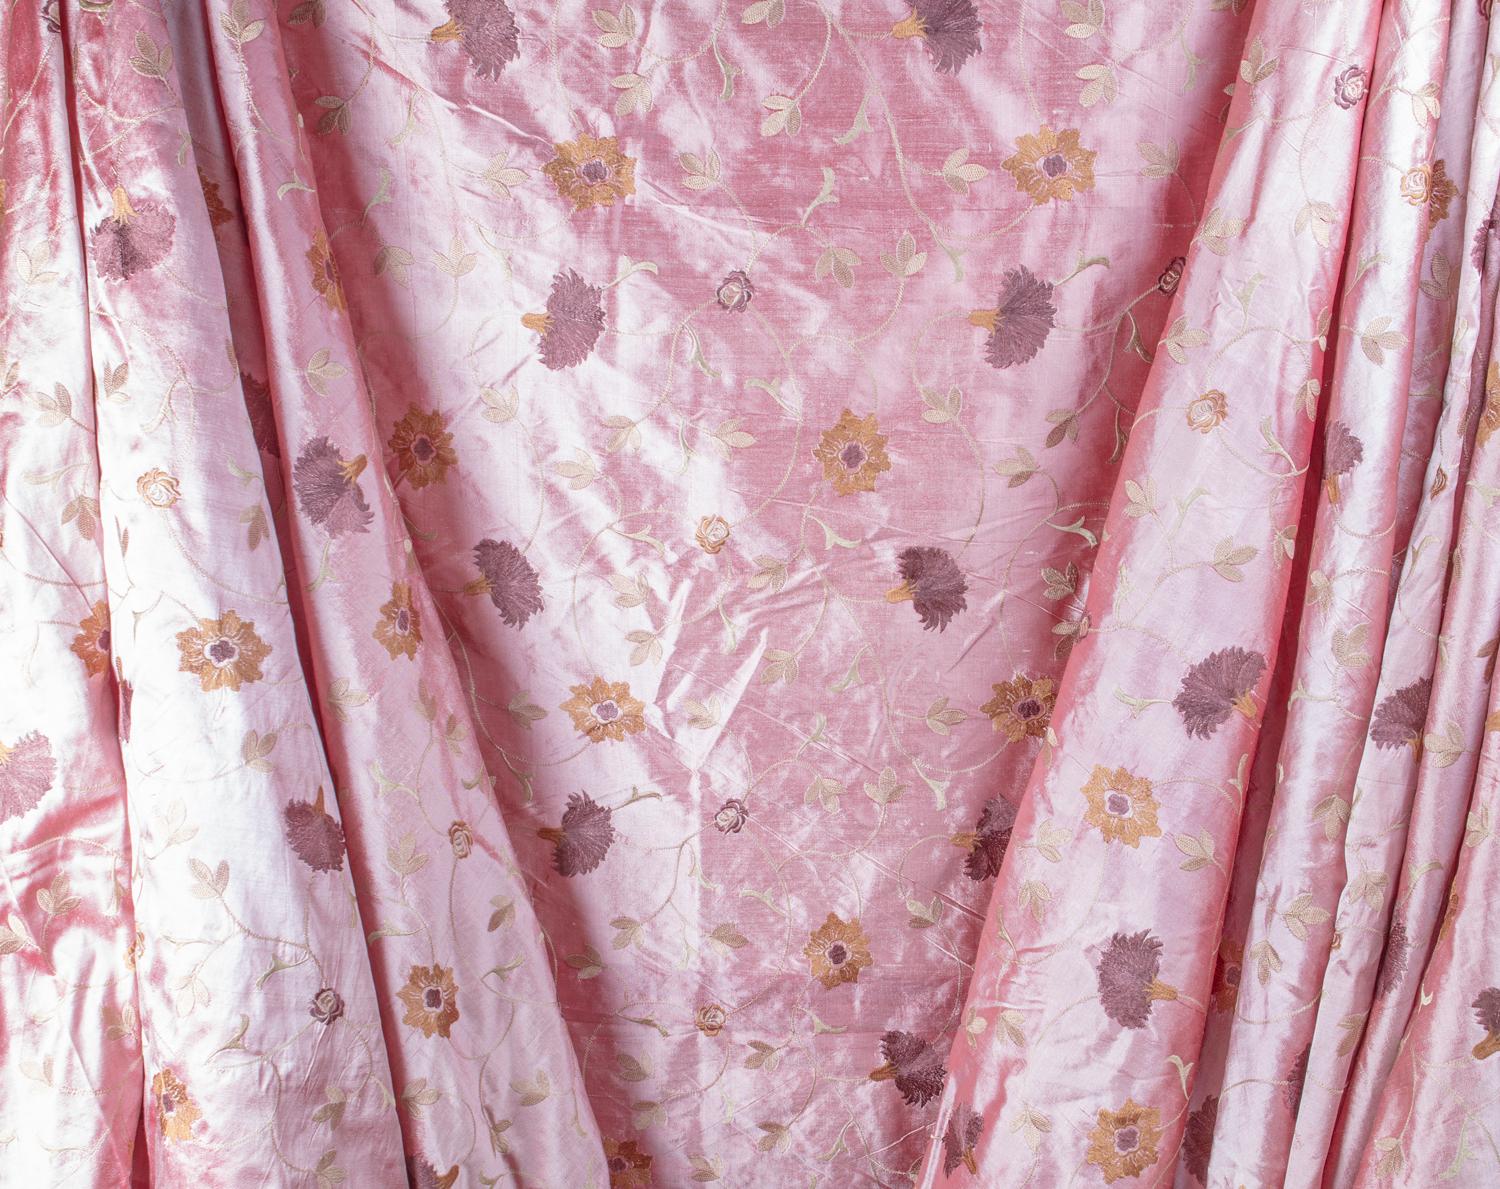 Beautiful dusty rose tone raw silk Dupioni fabric featuring intricate hand guided chain stitch embroidery of saffron, garnet, amethyst floral and celedon trellis motif. 100% hand dyed raw woven silk.